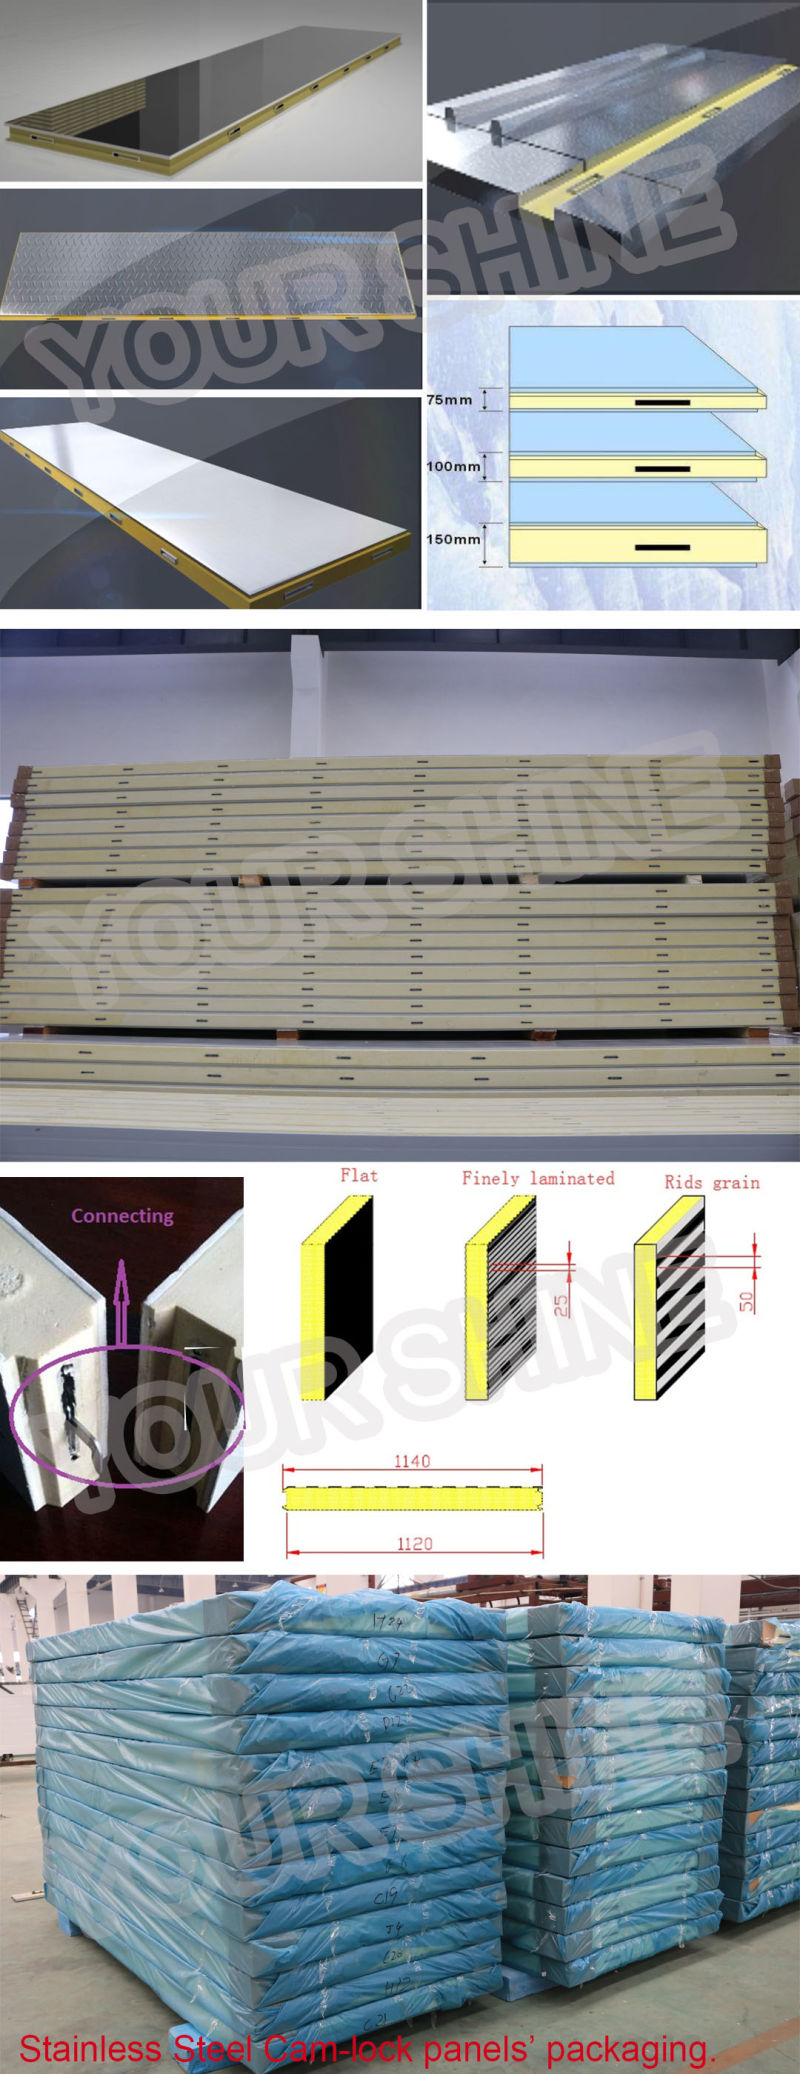 PU Panel for Cold Room, Cold Room Panel, Cold Room Sandwich Panel with Cam Lock